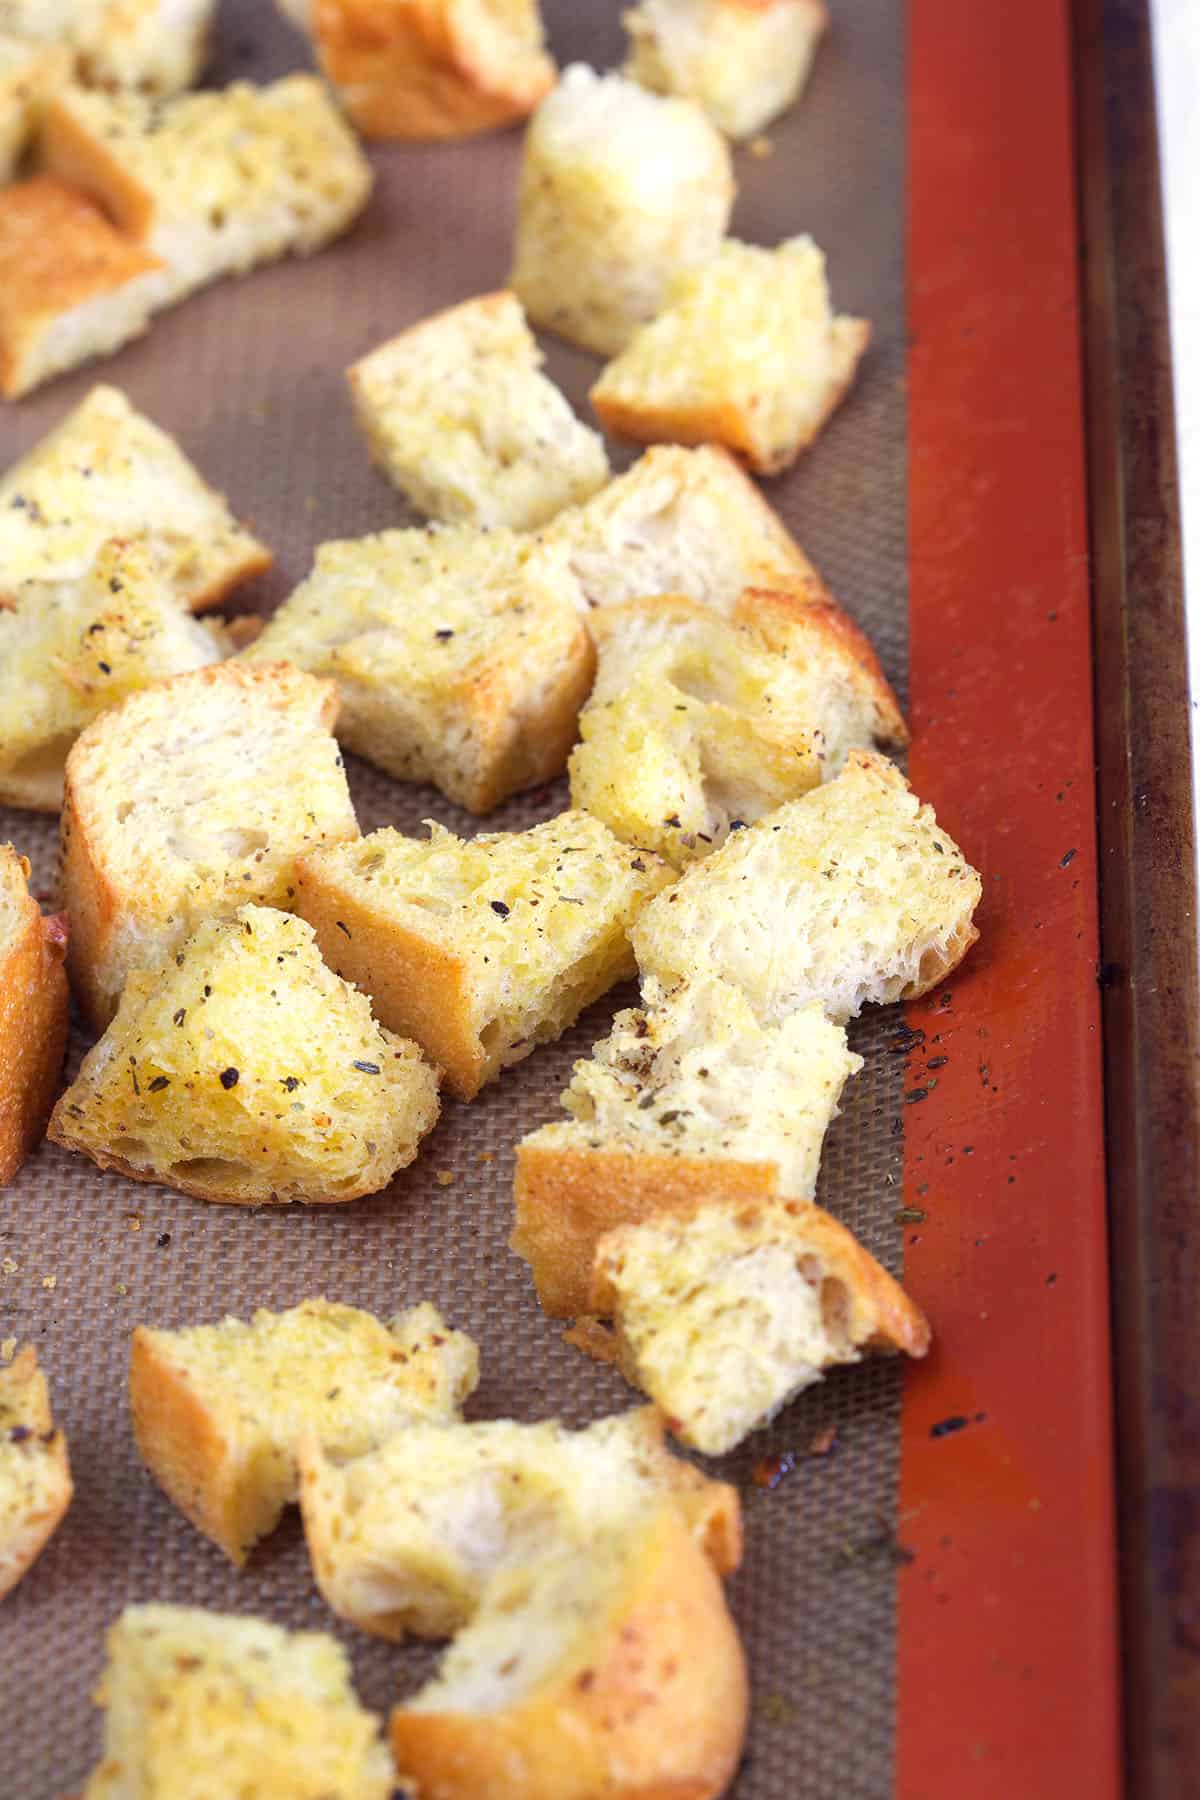 Croutons are baked on a siplat baking sheet. 